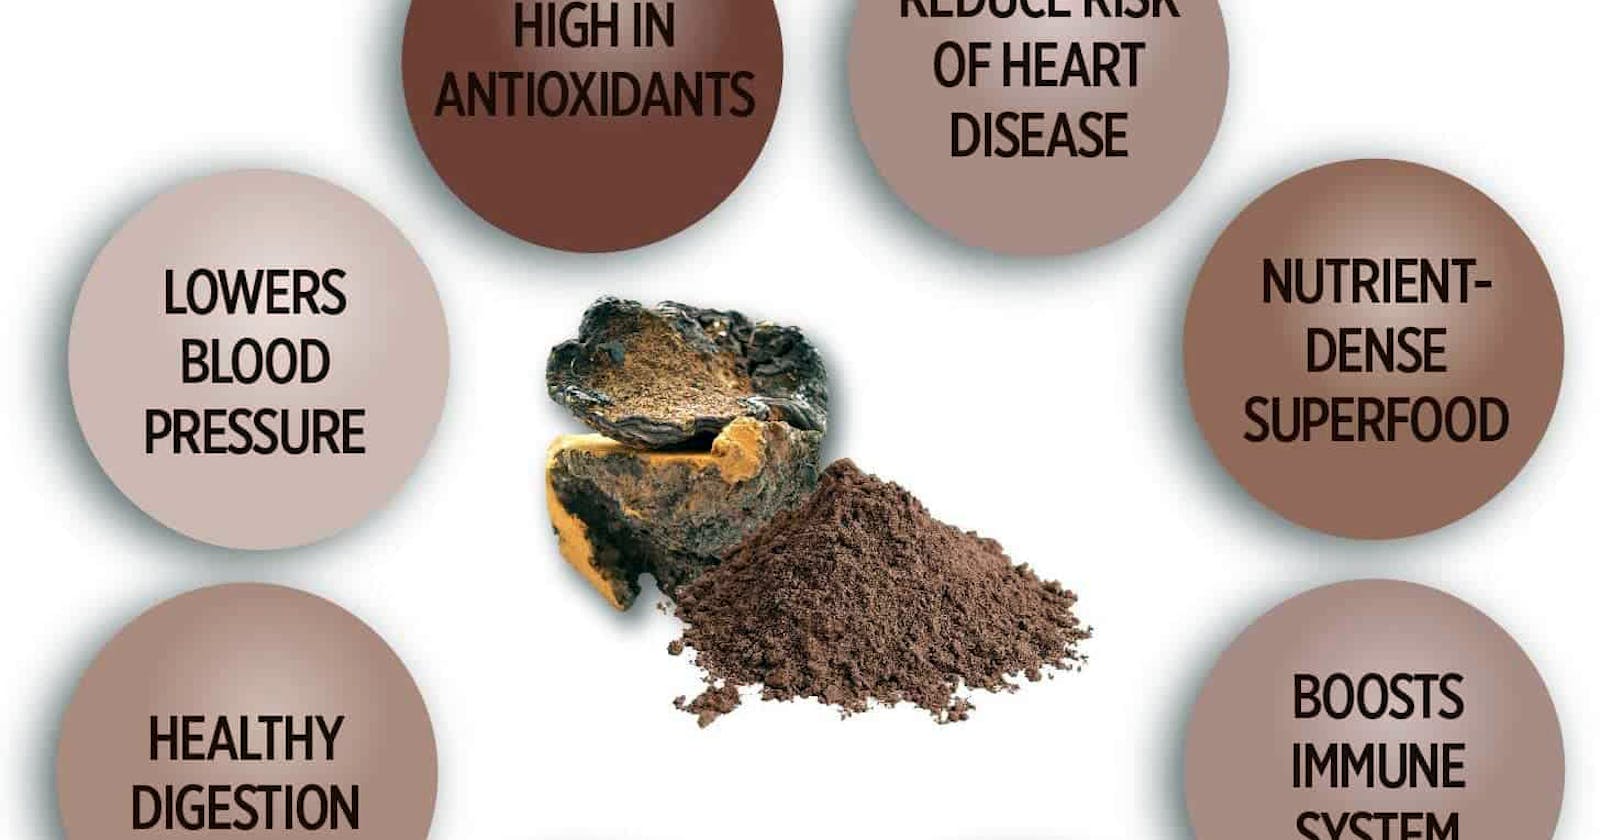 100% Natural Superfood Chaga Mushroom Powder Nourish the Skin and Hair Cancer Prevention Free Shipping